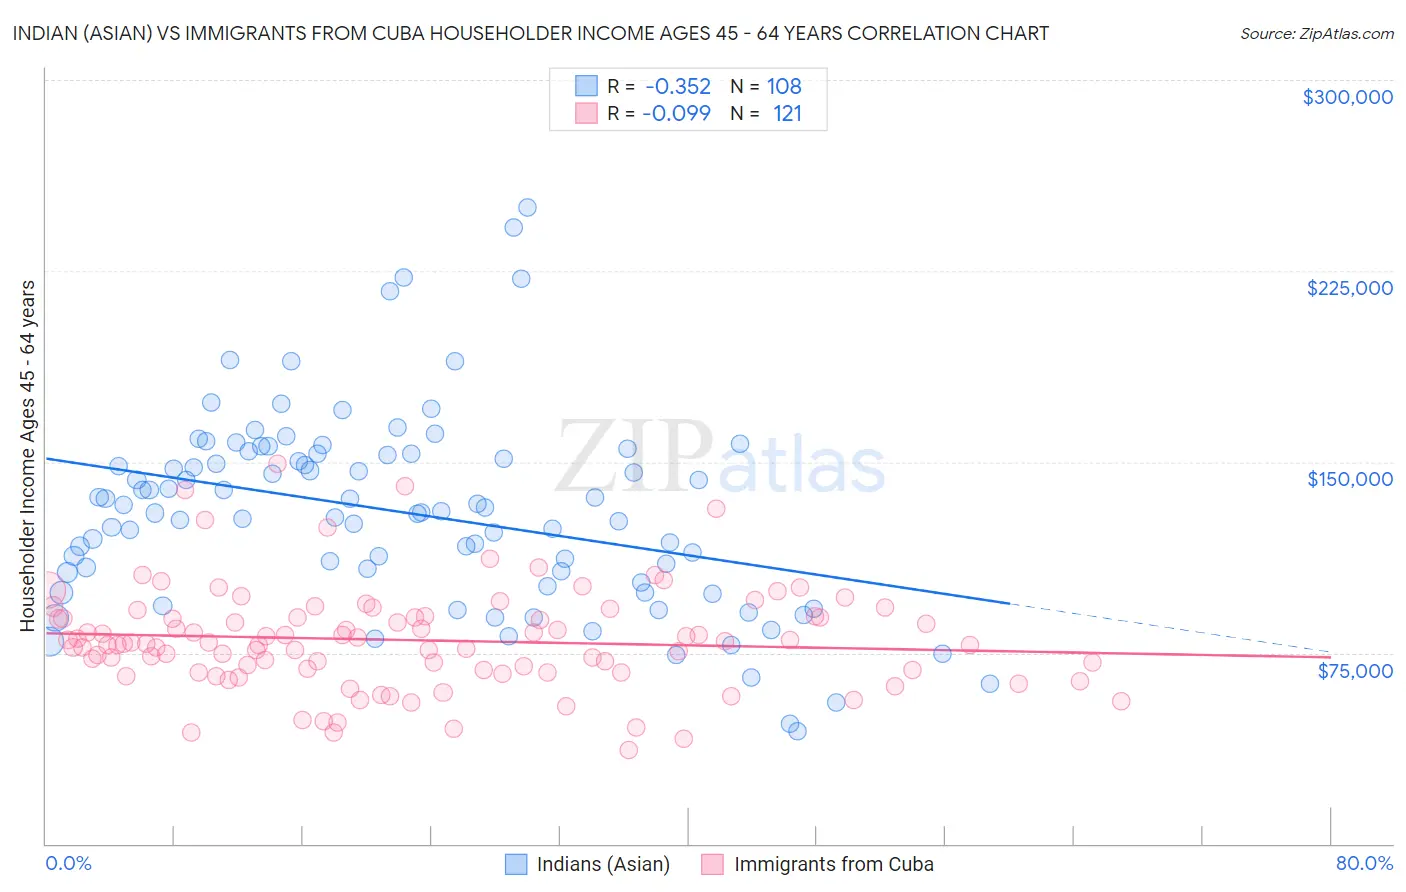 Indian (Asian) vs Immigrants from Cuba Householder Income Ages 45 - 64 years